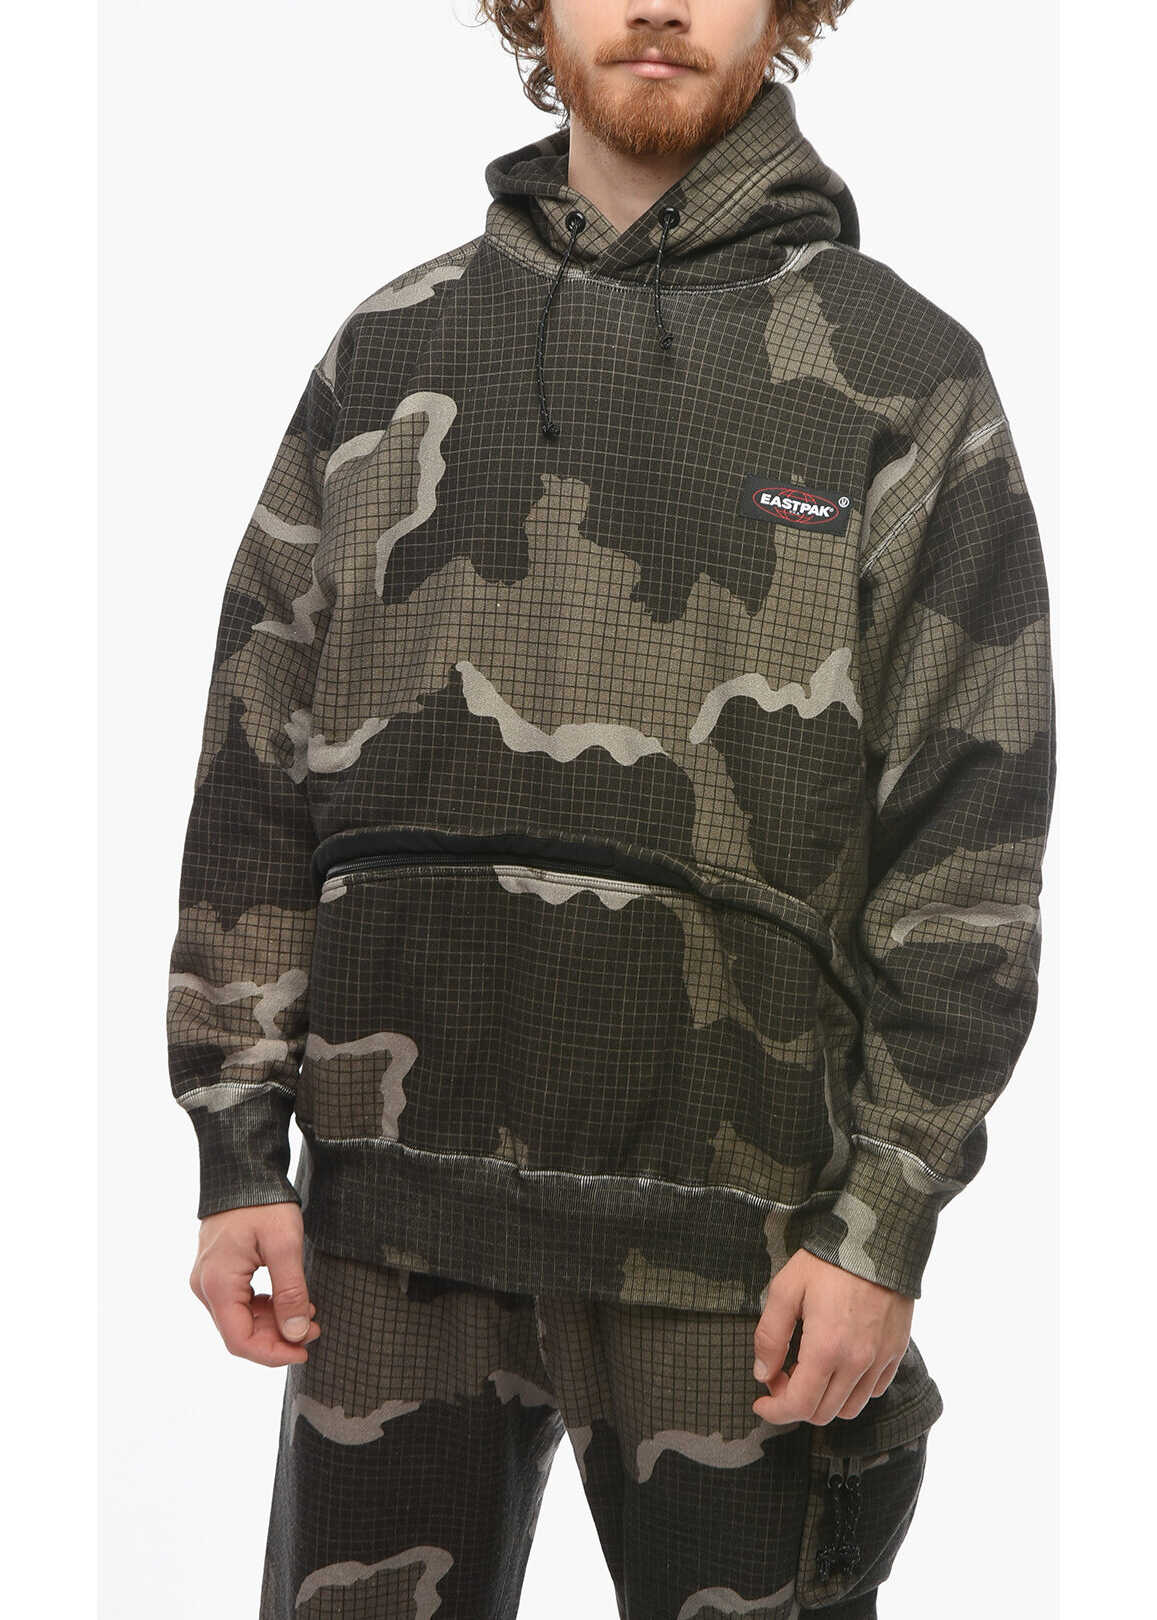 UNDERCOVER Eastpack Oversized Hoodie Sweatshirt With Camouflage Pattern Brown